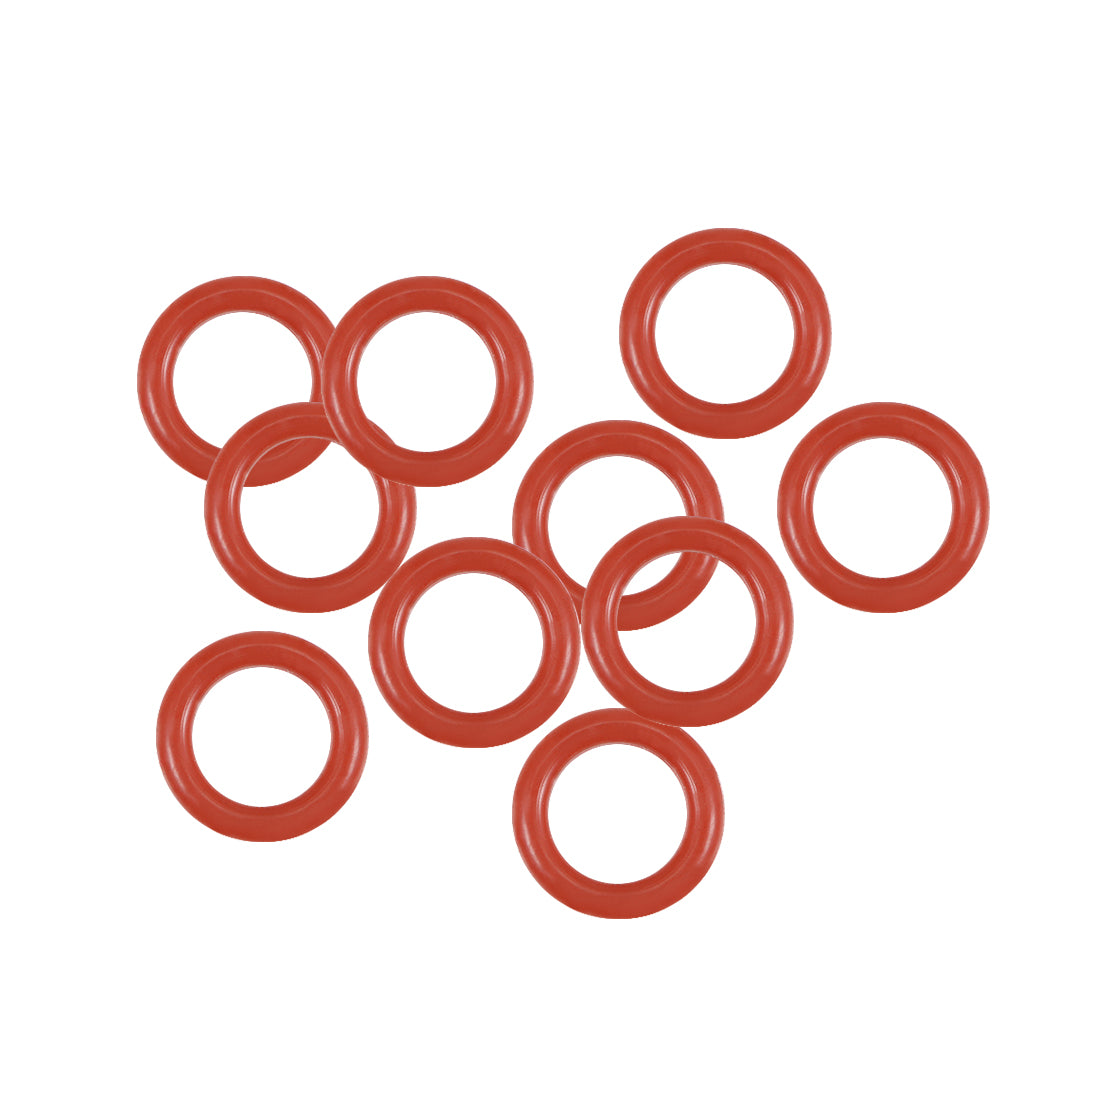 uxcell Uxcell Silicone O-Rings 5.5mm OD, 3.5mm Inner Diameter, 1mm Width, Seal Gasket Red 10Pcs